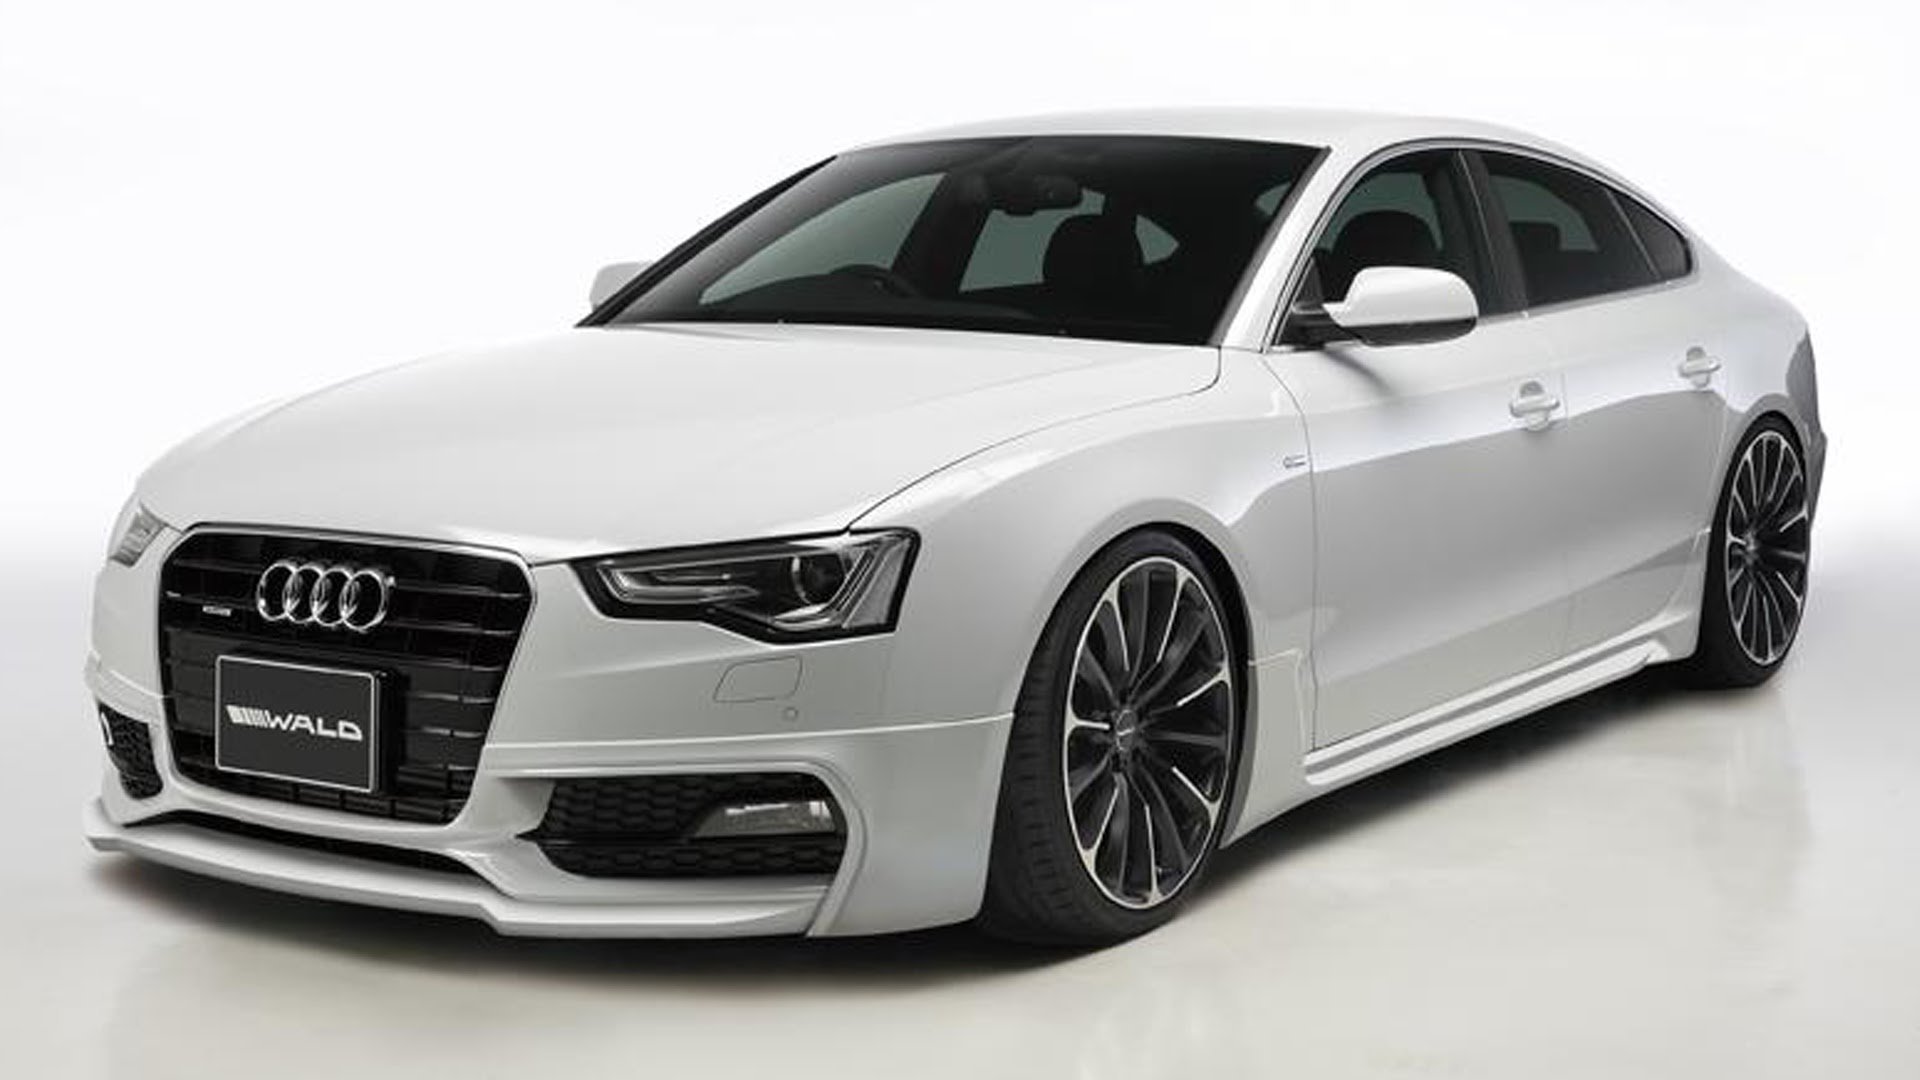 Audi A5 Sportback 2017 Wallpapers And Images Wallpapers Pictures Photos